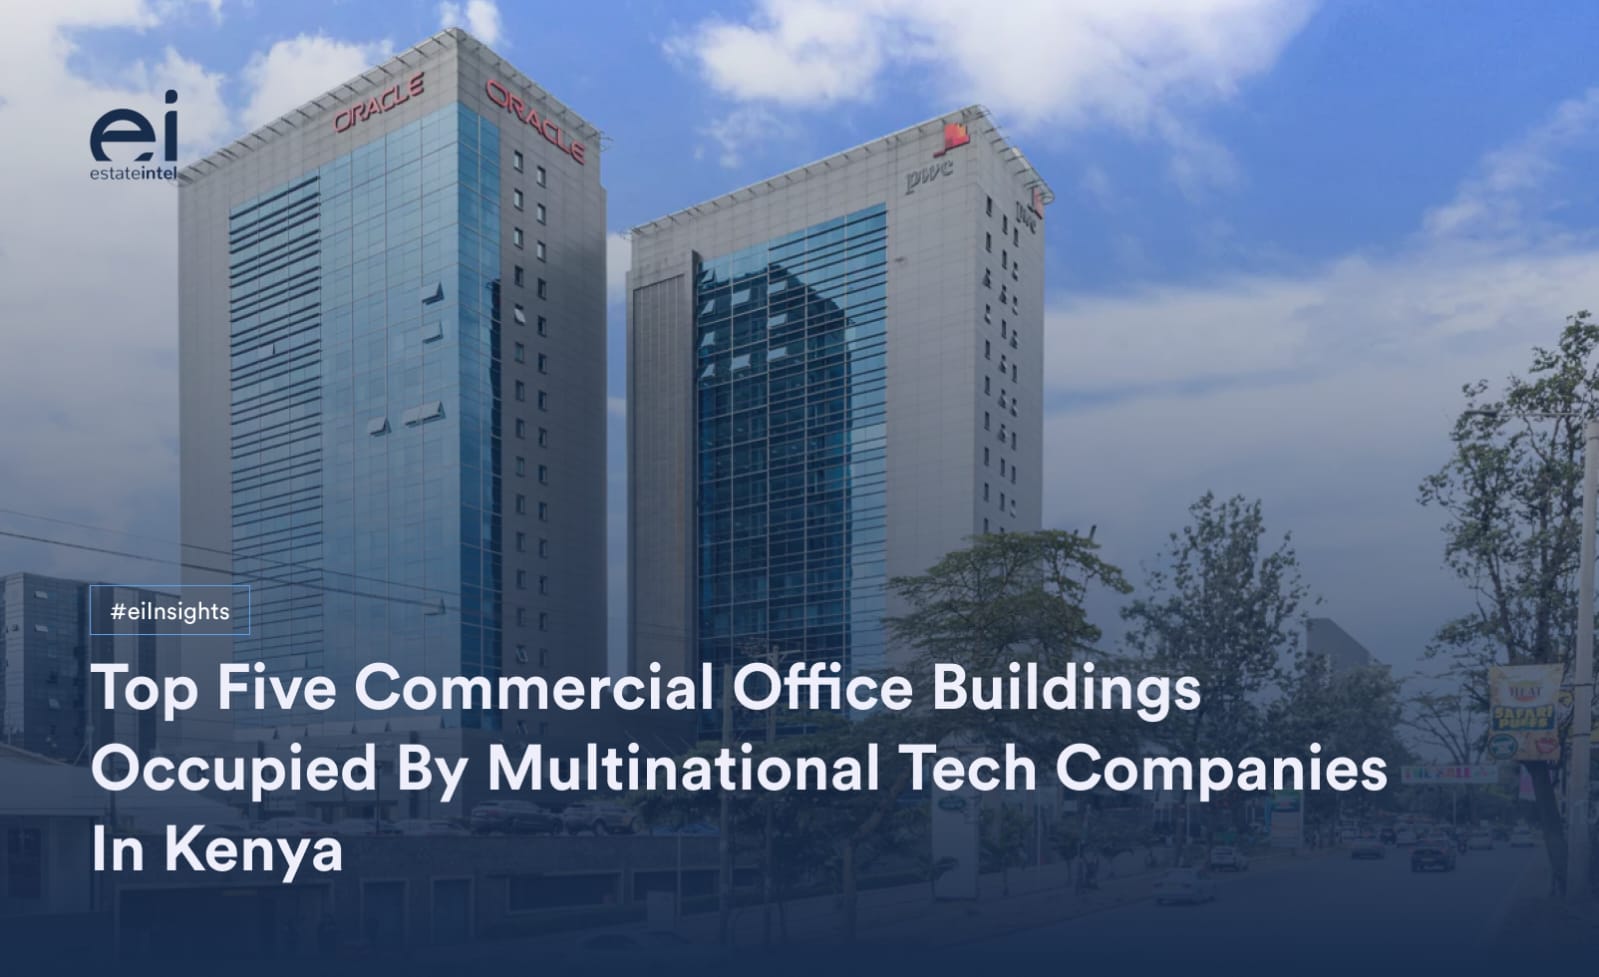 Top Five Commercial Office Buildings Occupied By Multinational Tech Companies In Kenya